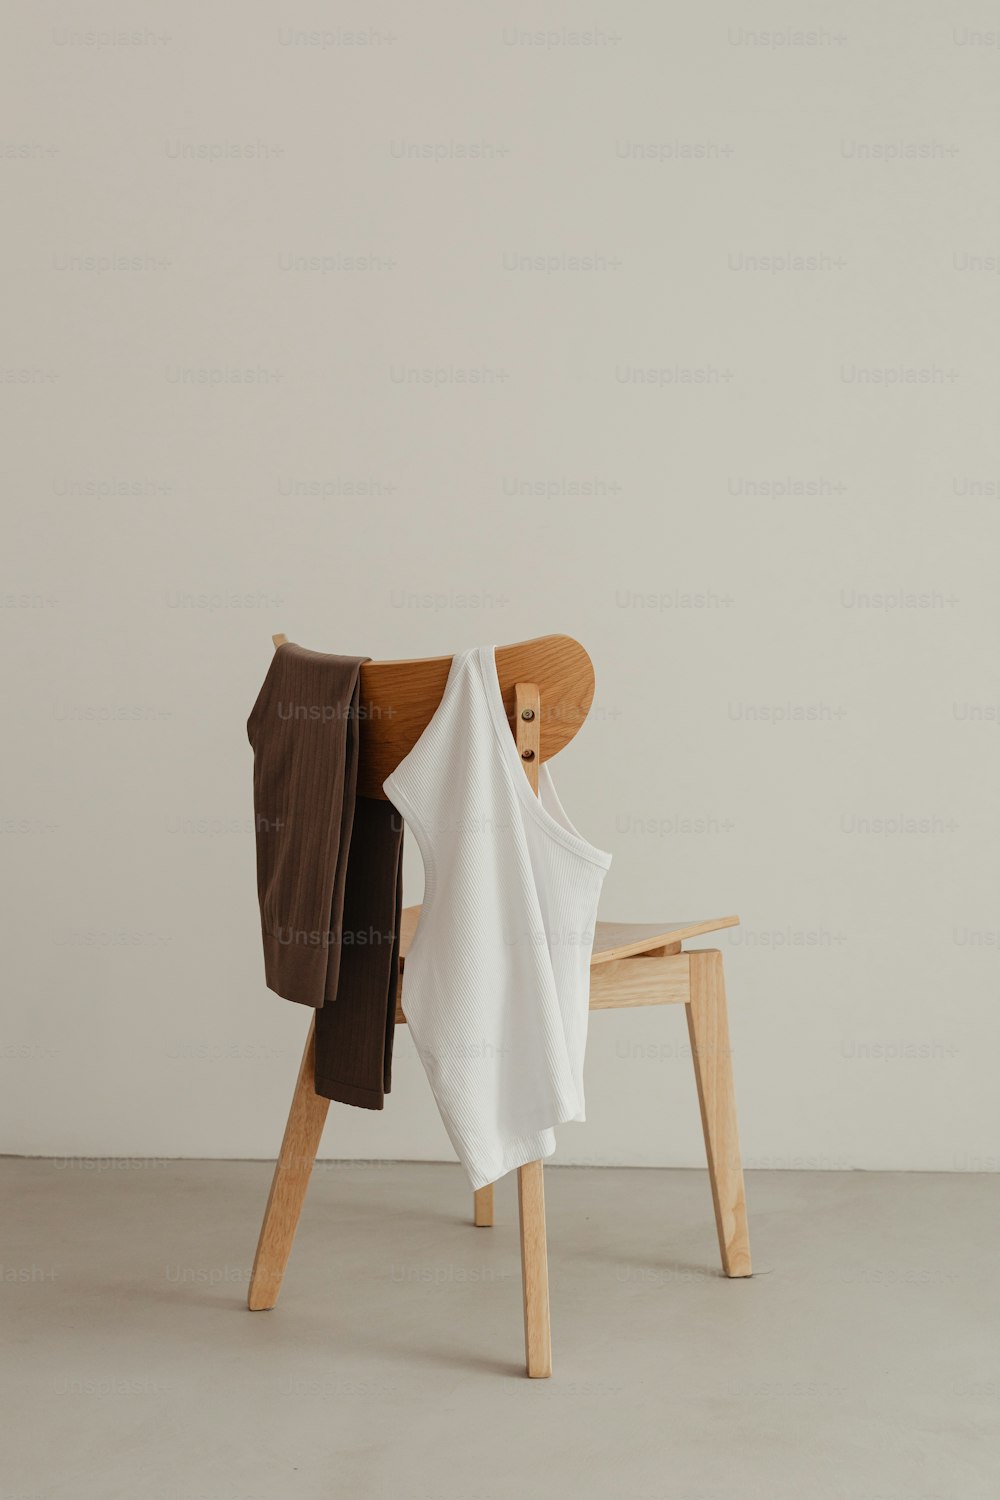 a wooden chair with a white shirt on it